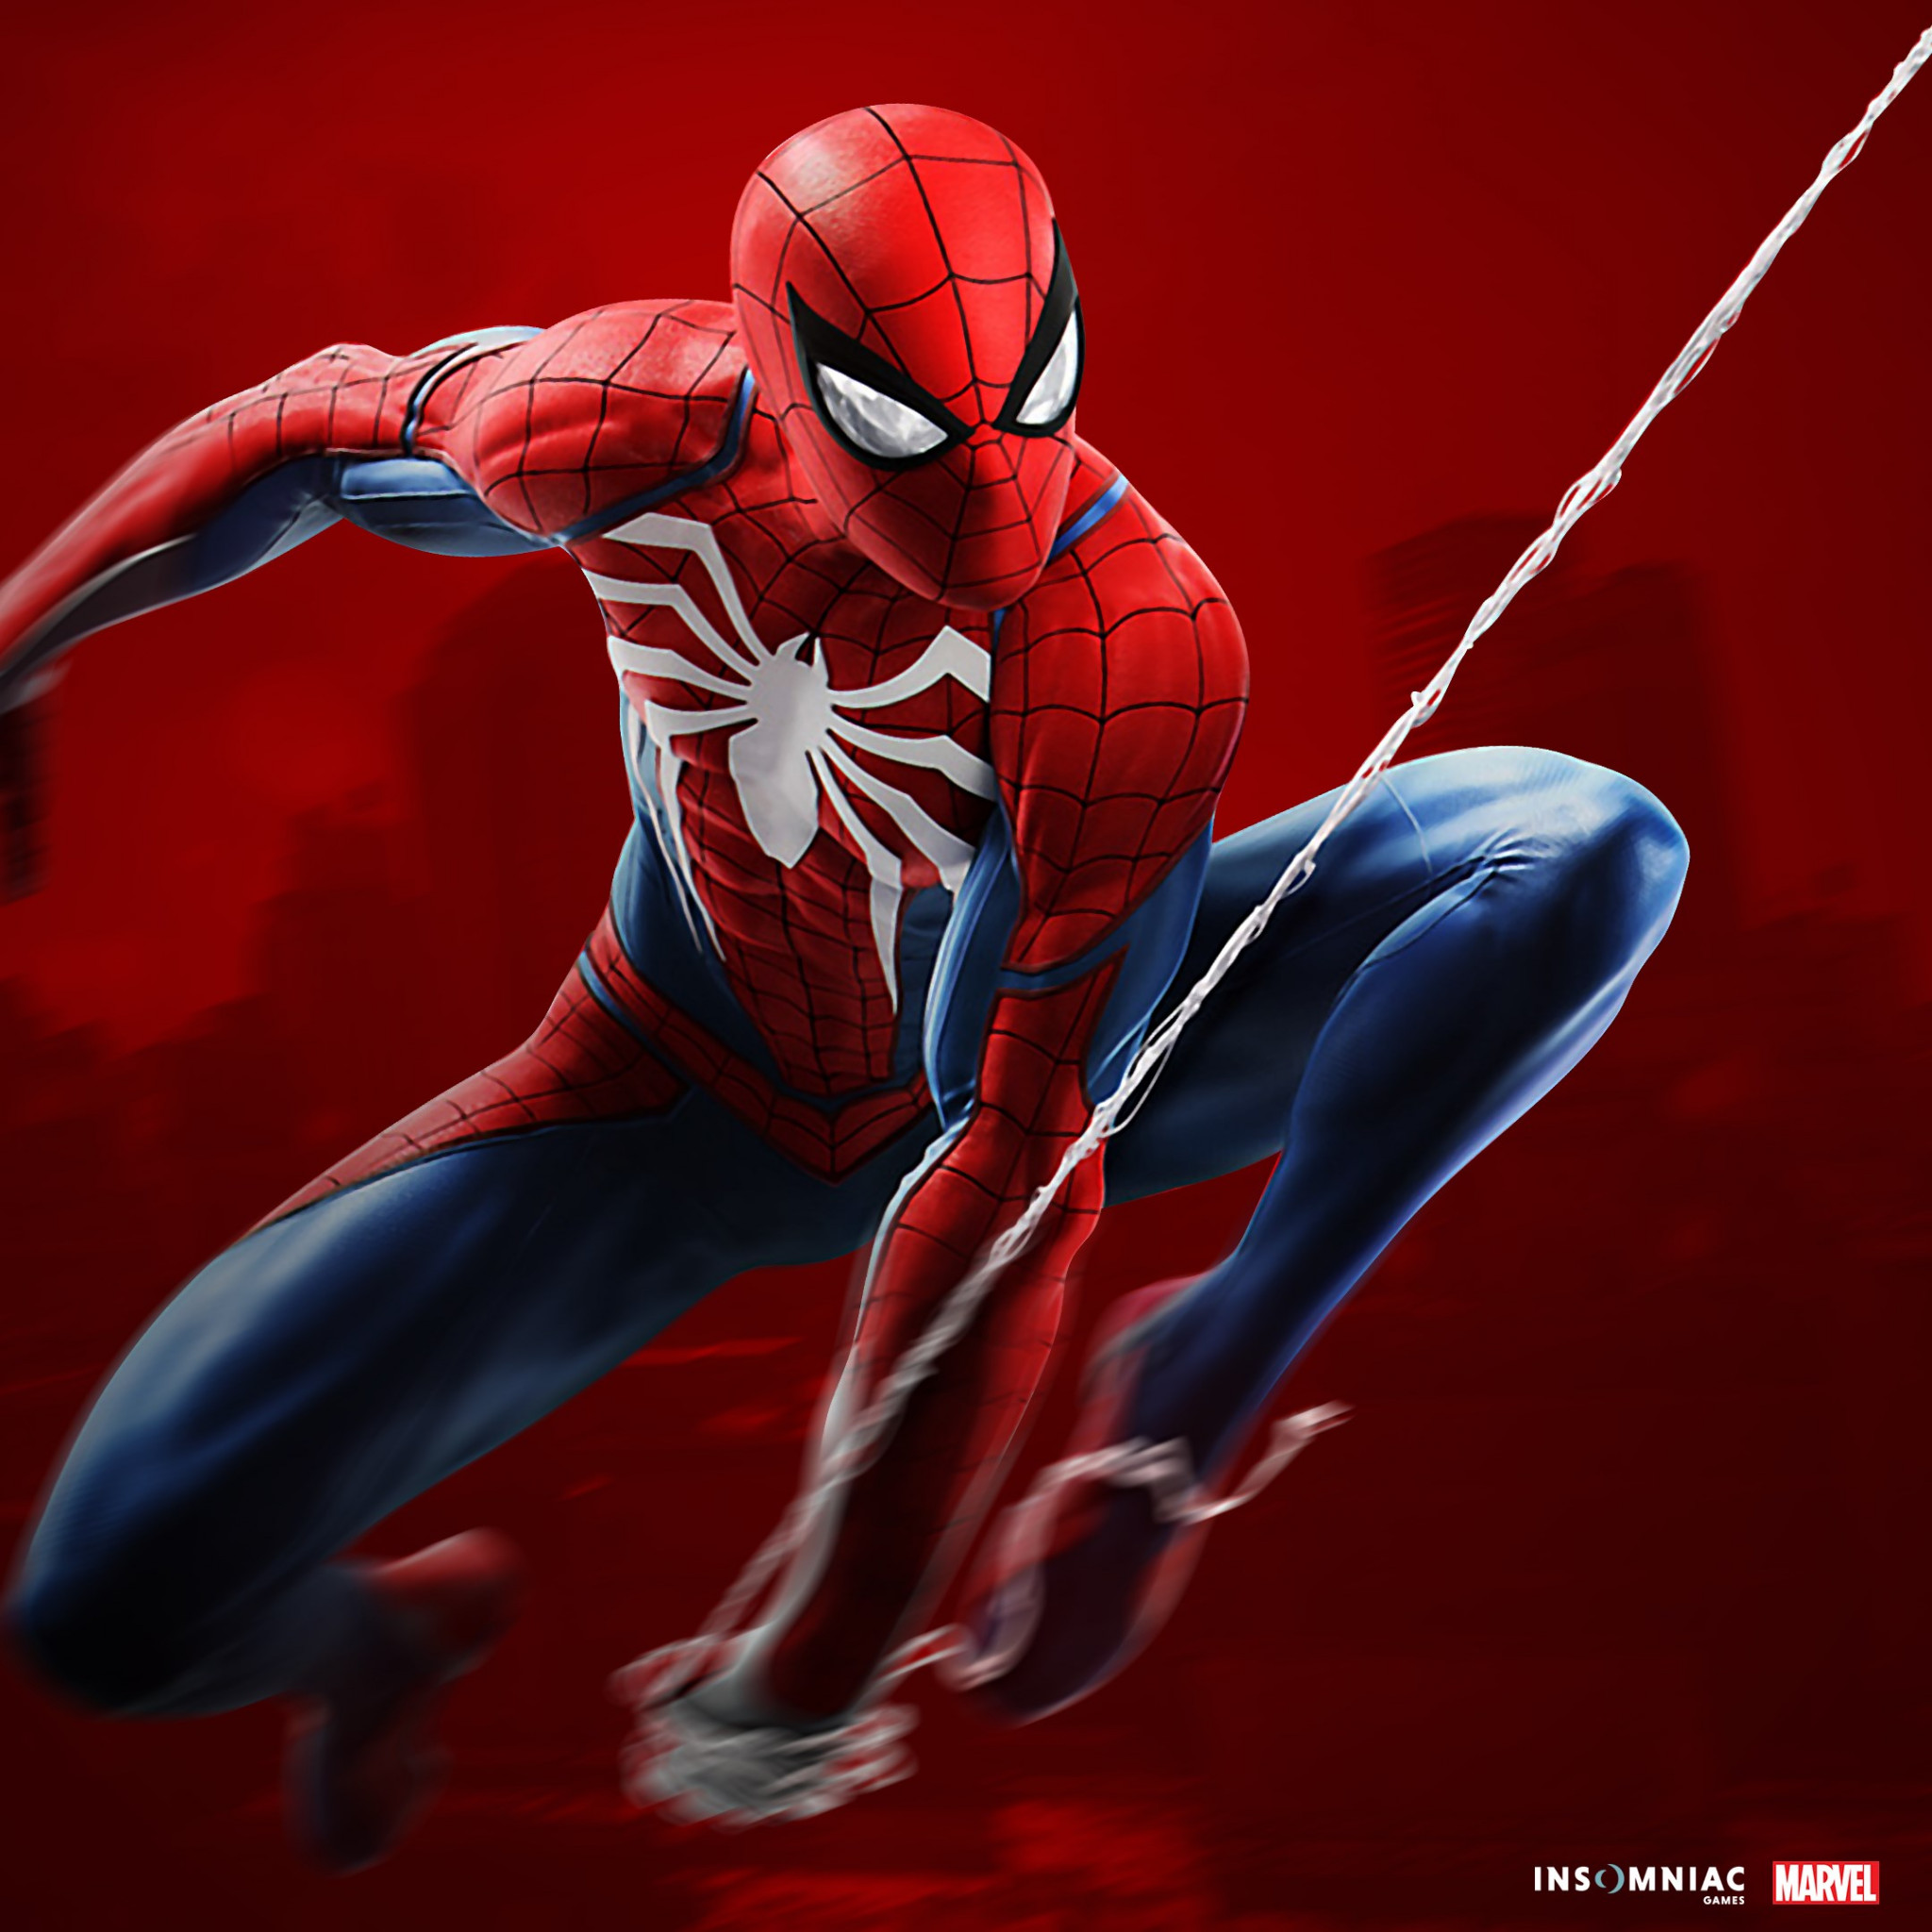 Spider Man game on PS4 wallpaper 2048x2048